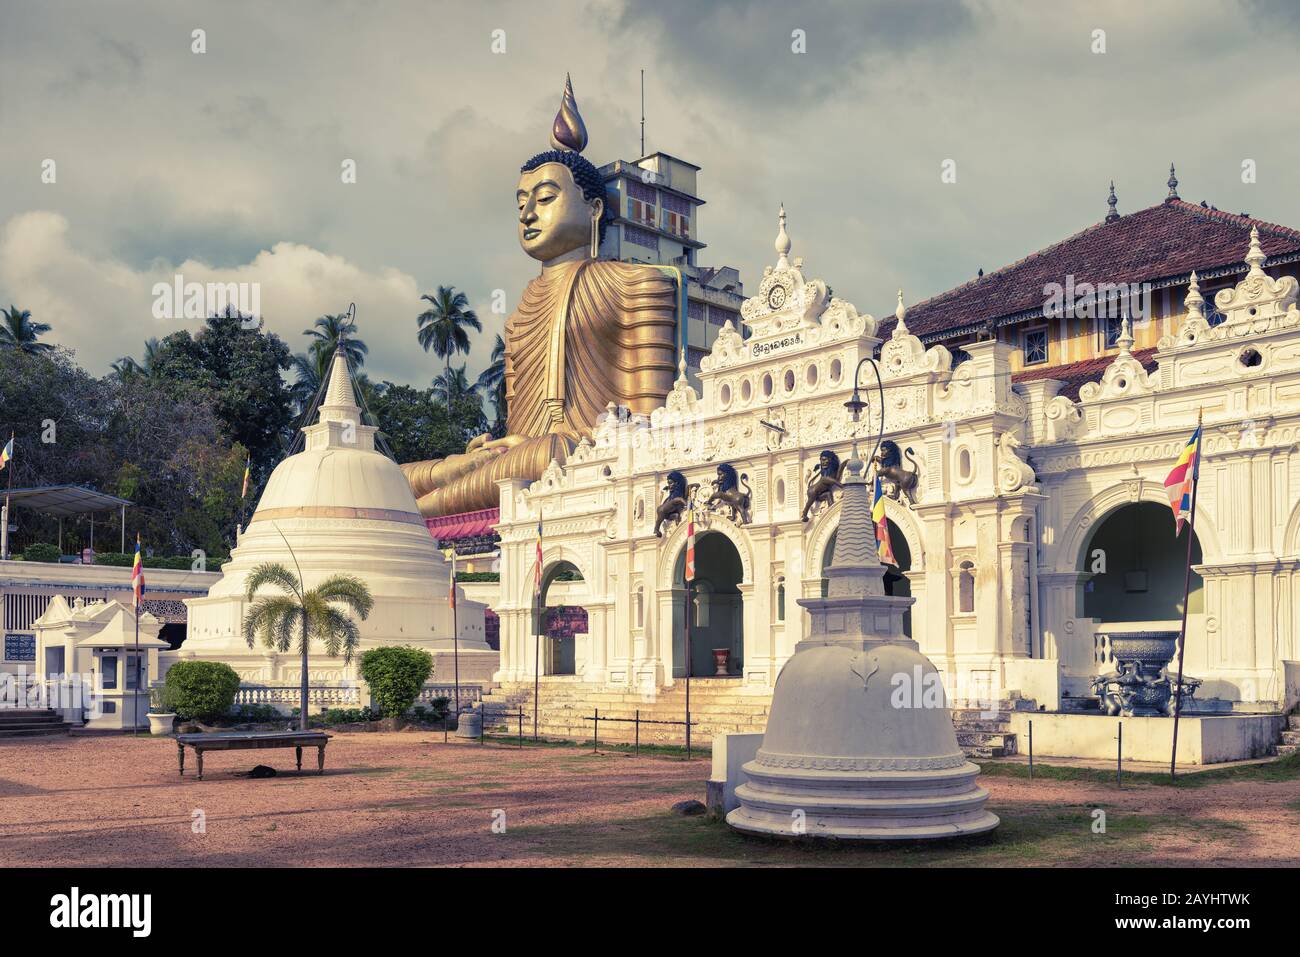 Wewurukannala Vihara is the old Buddhist temple in the town of Dickwella, Sri Lanka. A 50m-high seated Buddha statue is the largest in Sri Lanka. Stock Photo